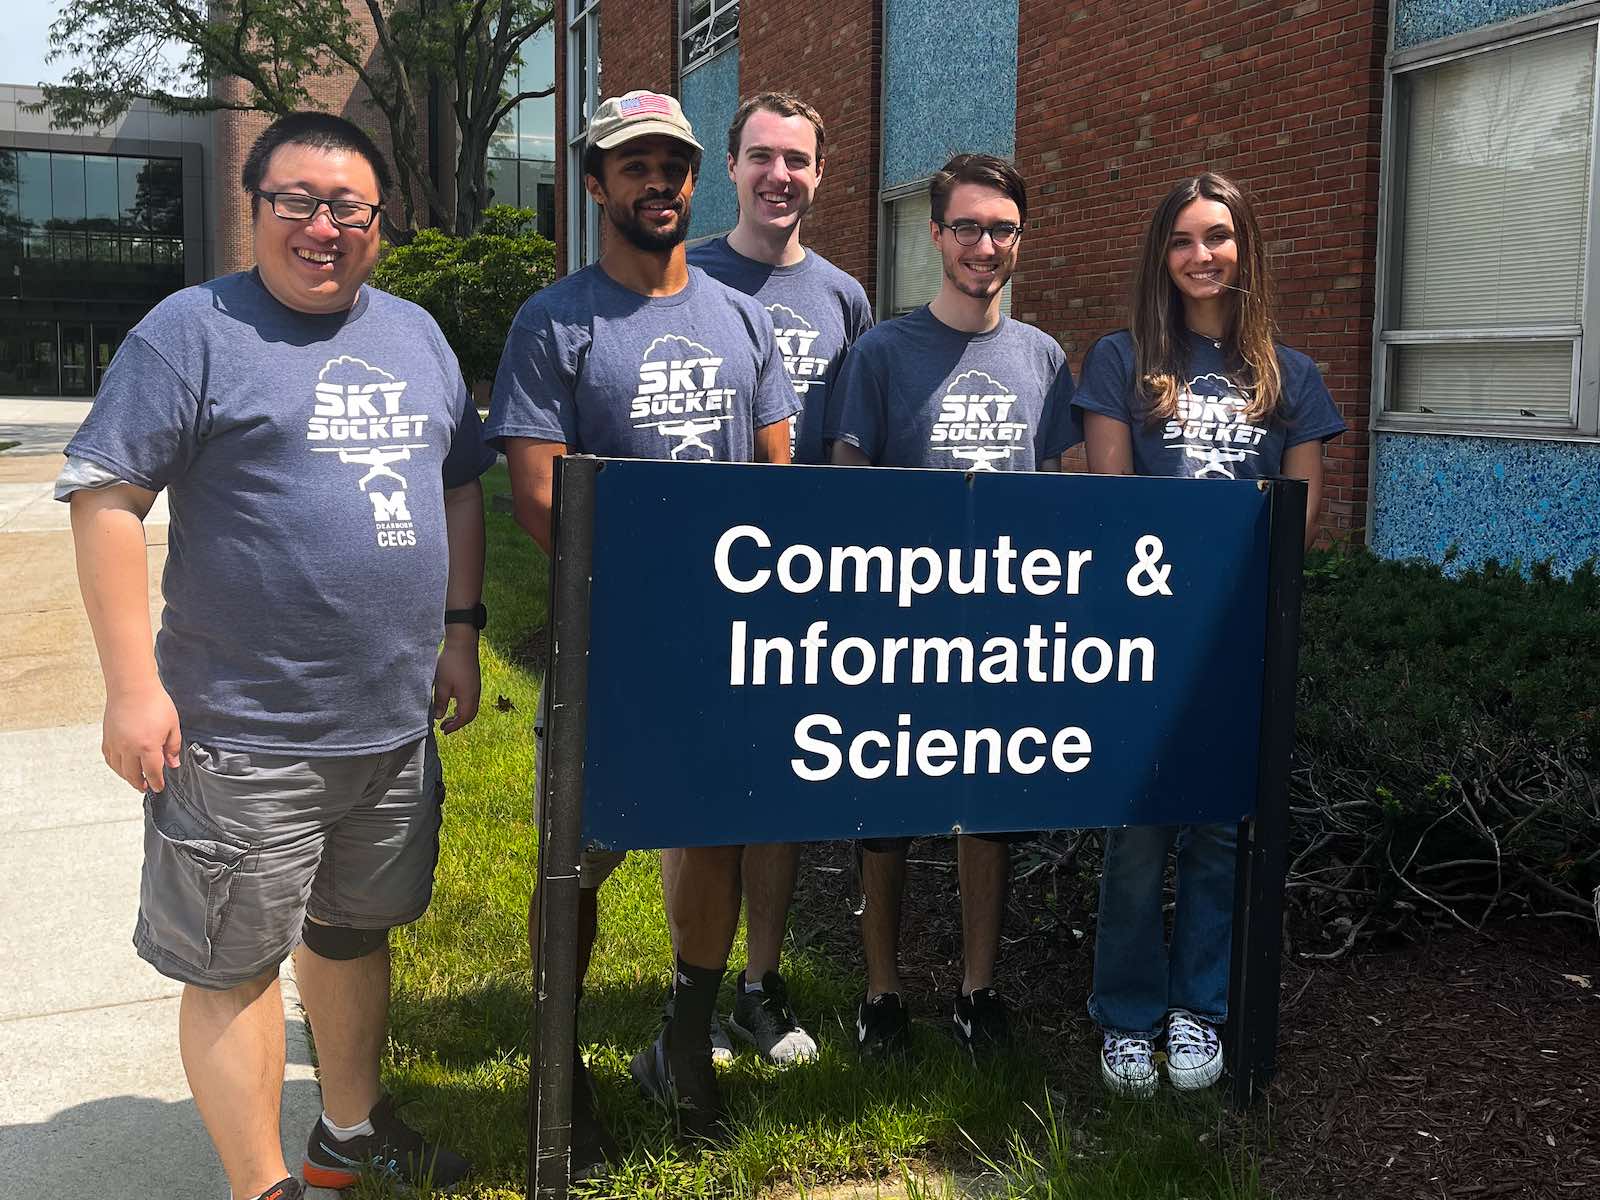 Wearing their custom "Sky Socket" project t-shirts, Assistant Professor Zheng Song stands with student Olivia Pellegrini and her senior design teammates outside the nameplate for the Computer and Information Science Building on a summer day. 